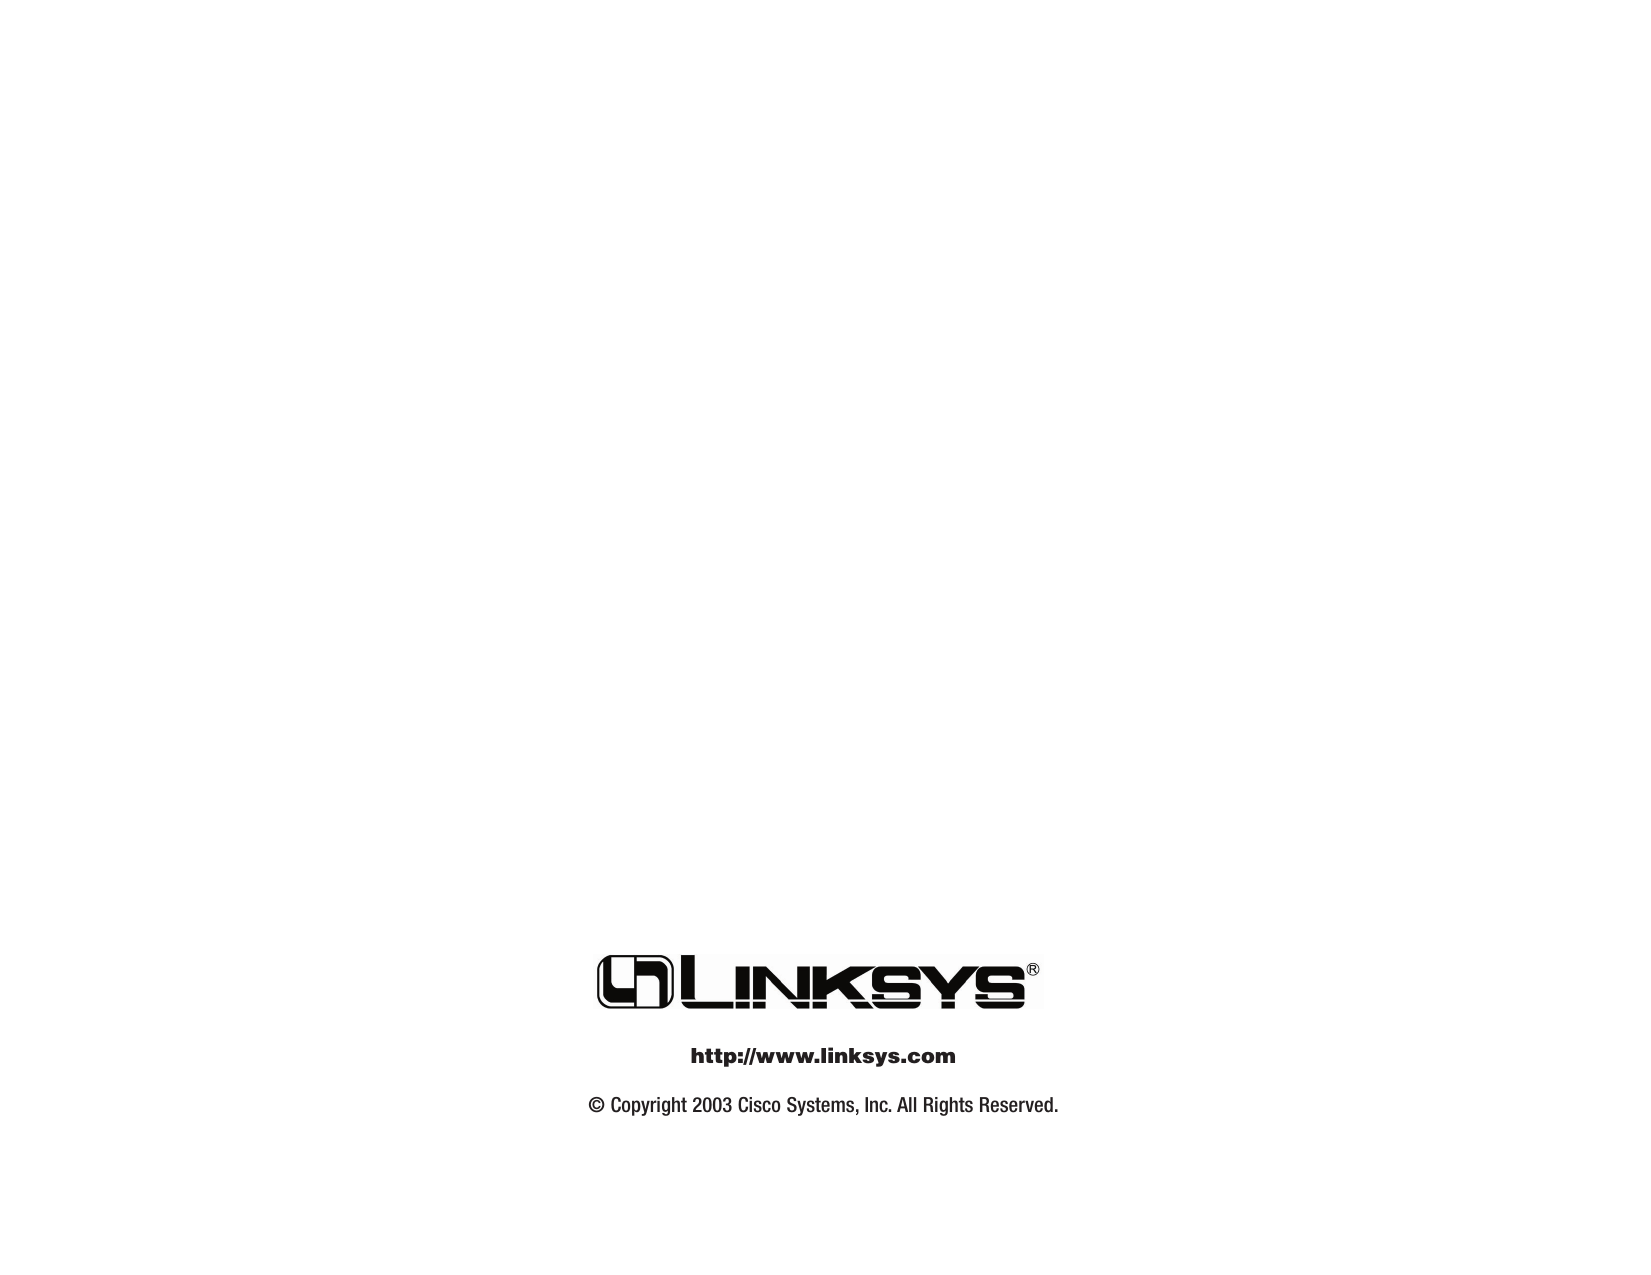 © Copyright 2003 Cisco Systems, Inc. All Rights Reserved.http://www.linksys.com